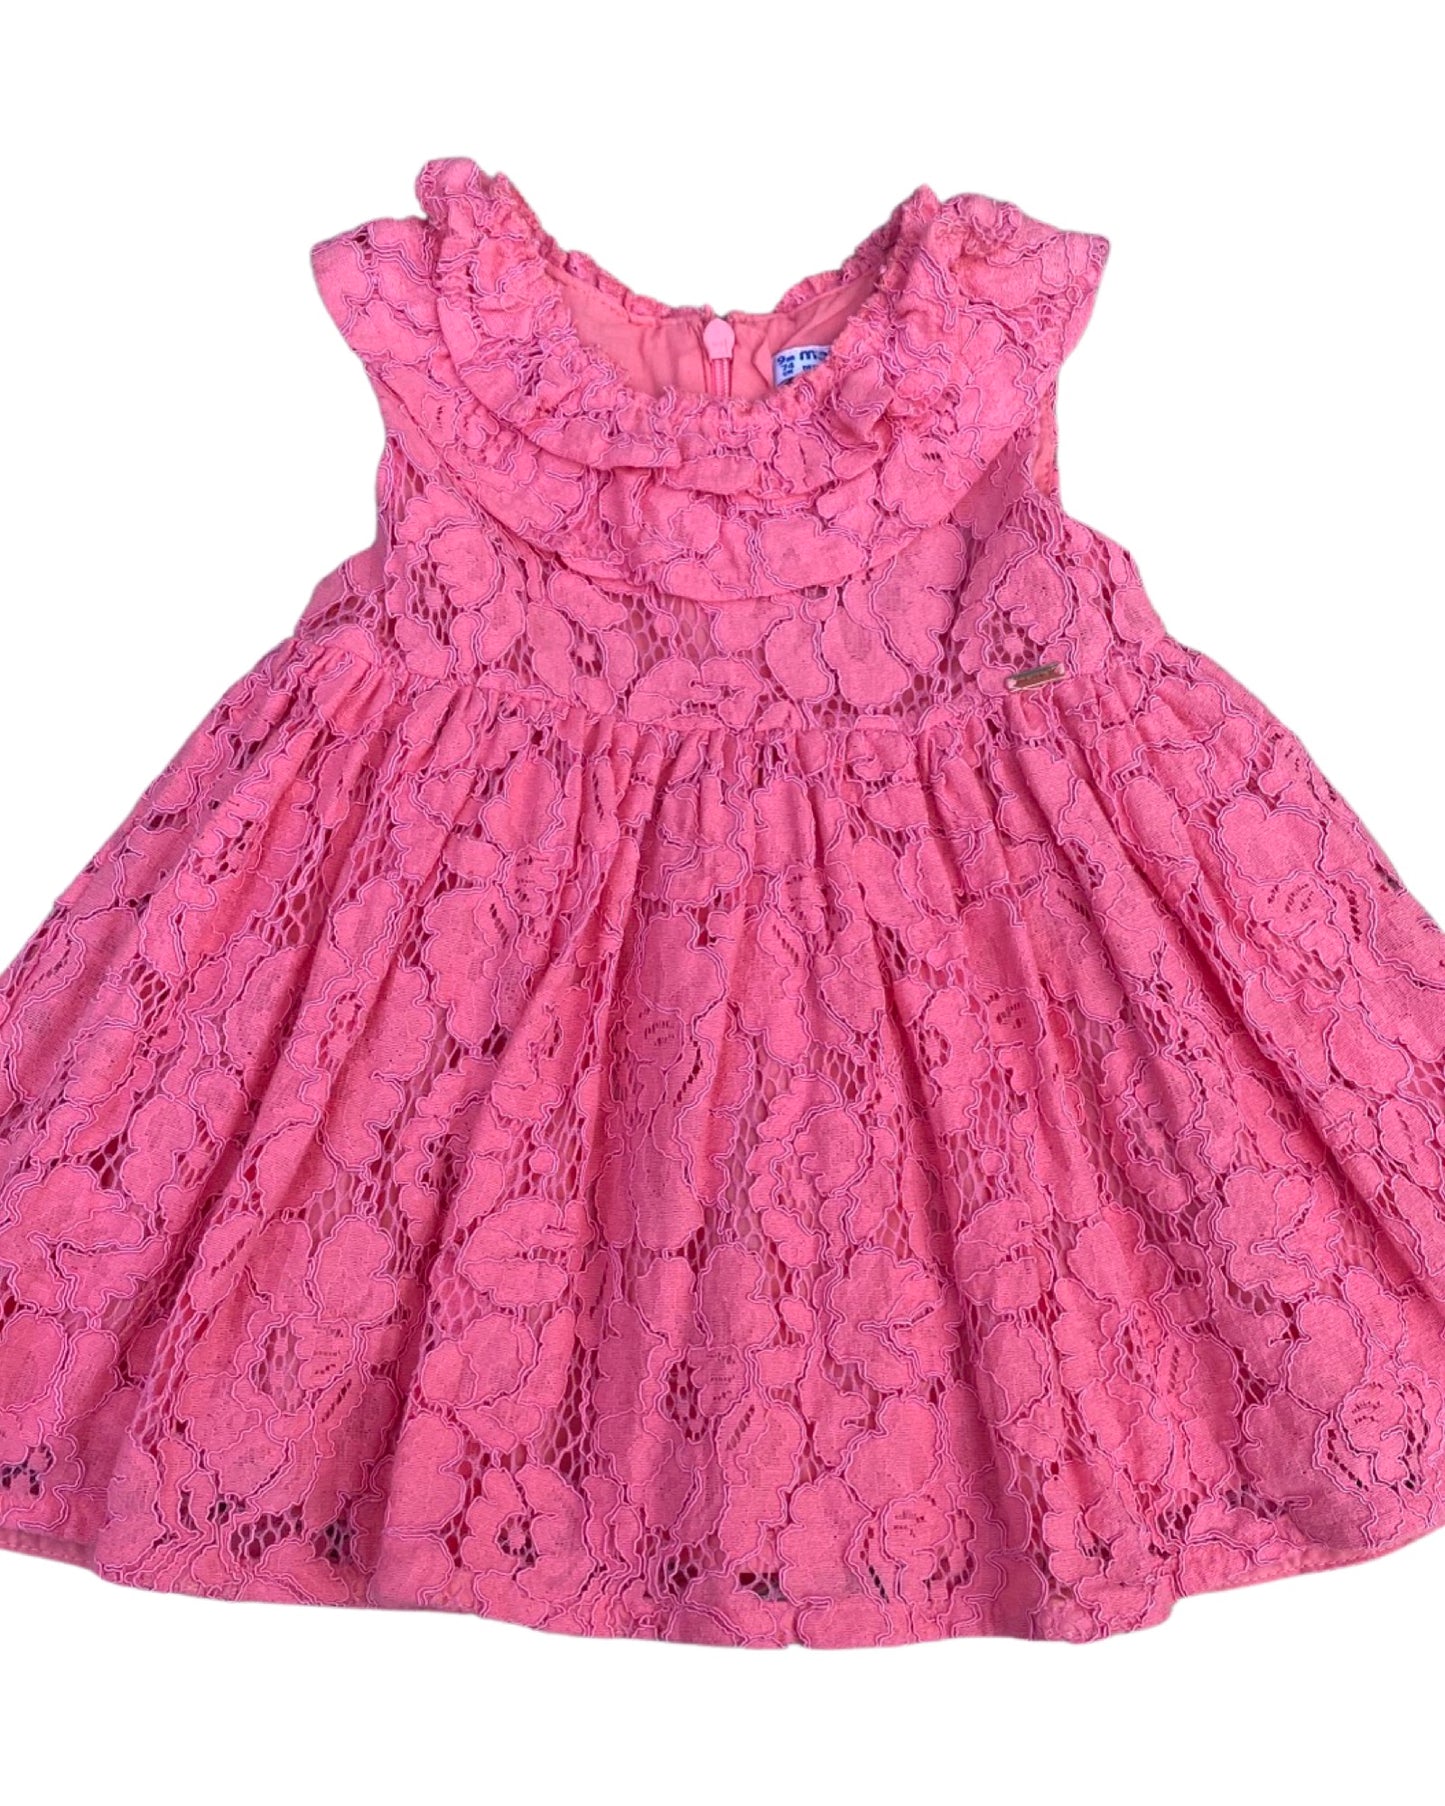 Mayoral pink frilled floral cut out dress (6-9mths)